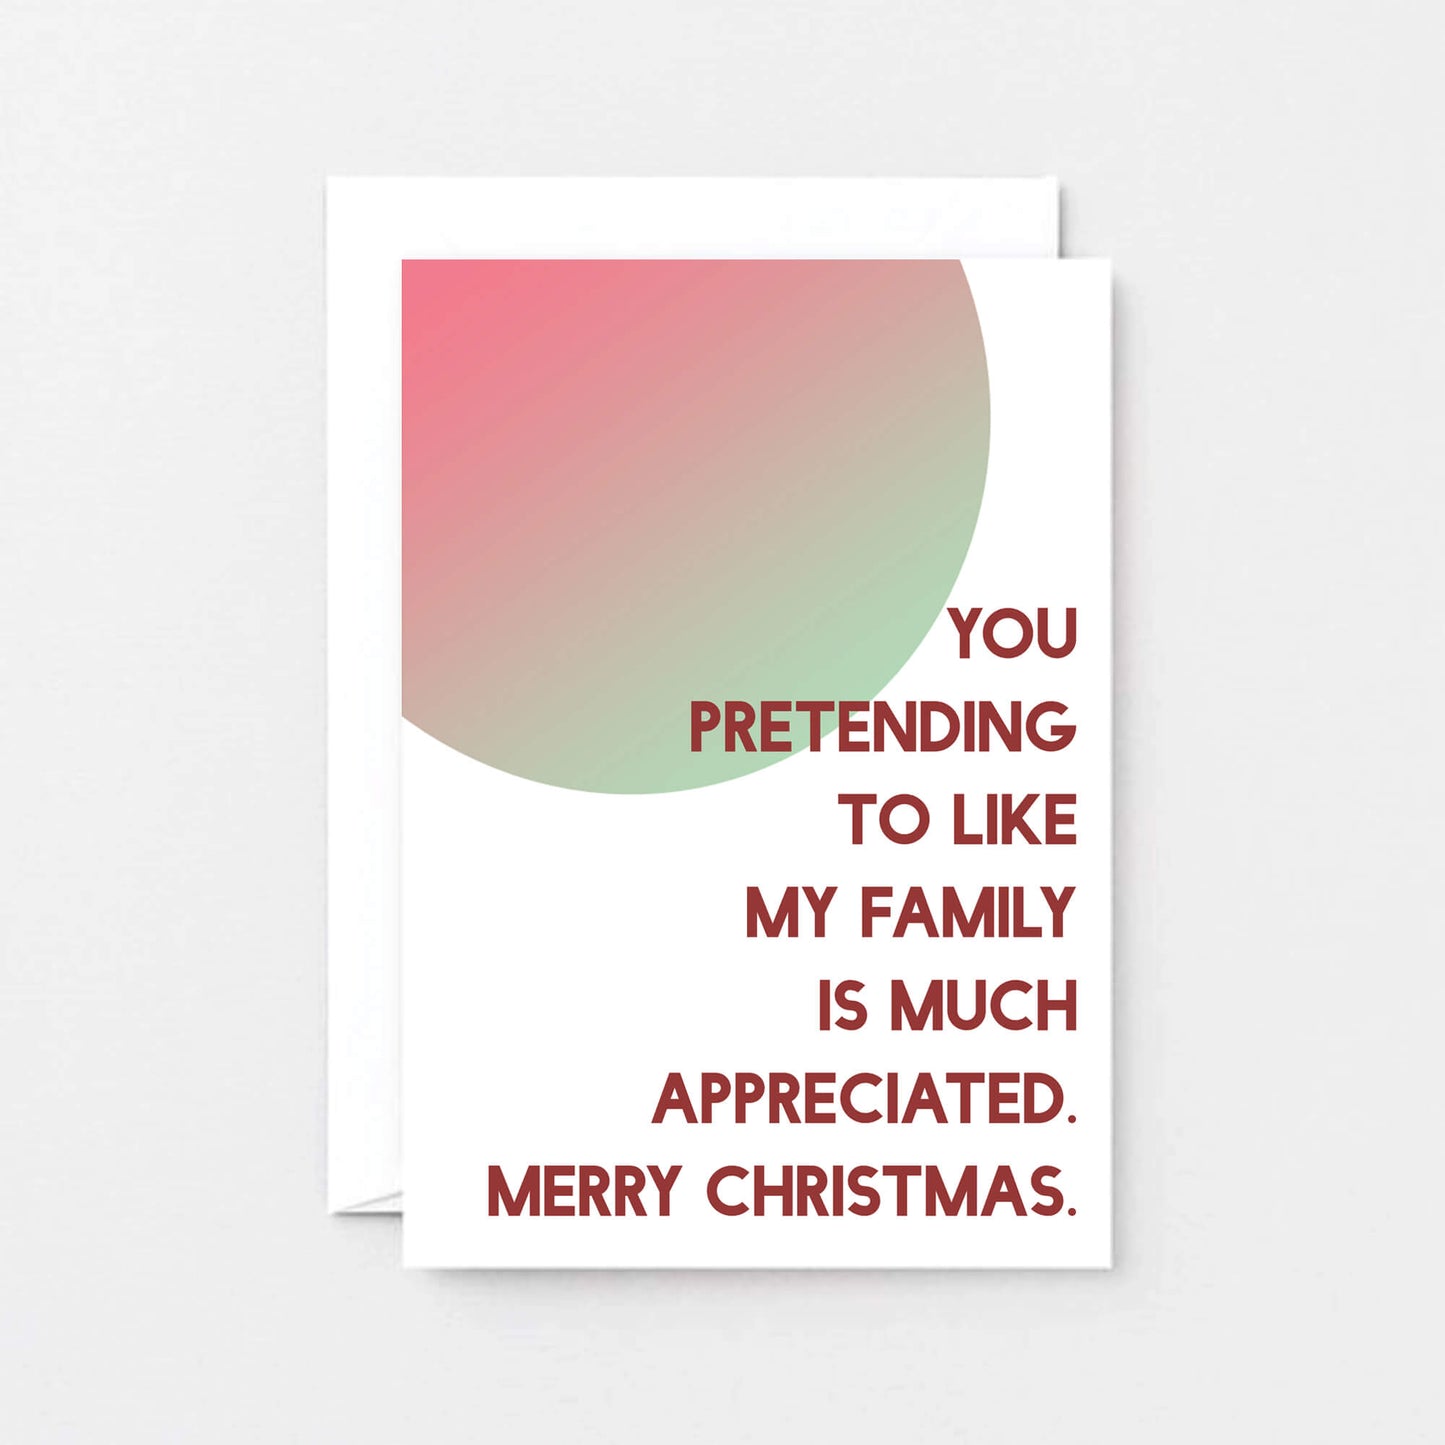 Christmas Card by SixElevenCreations. Reads You pretending to like my family is much appreciated. Merry Christmas. Product Code SEC0045A6